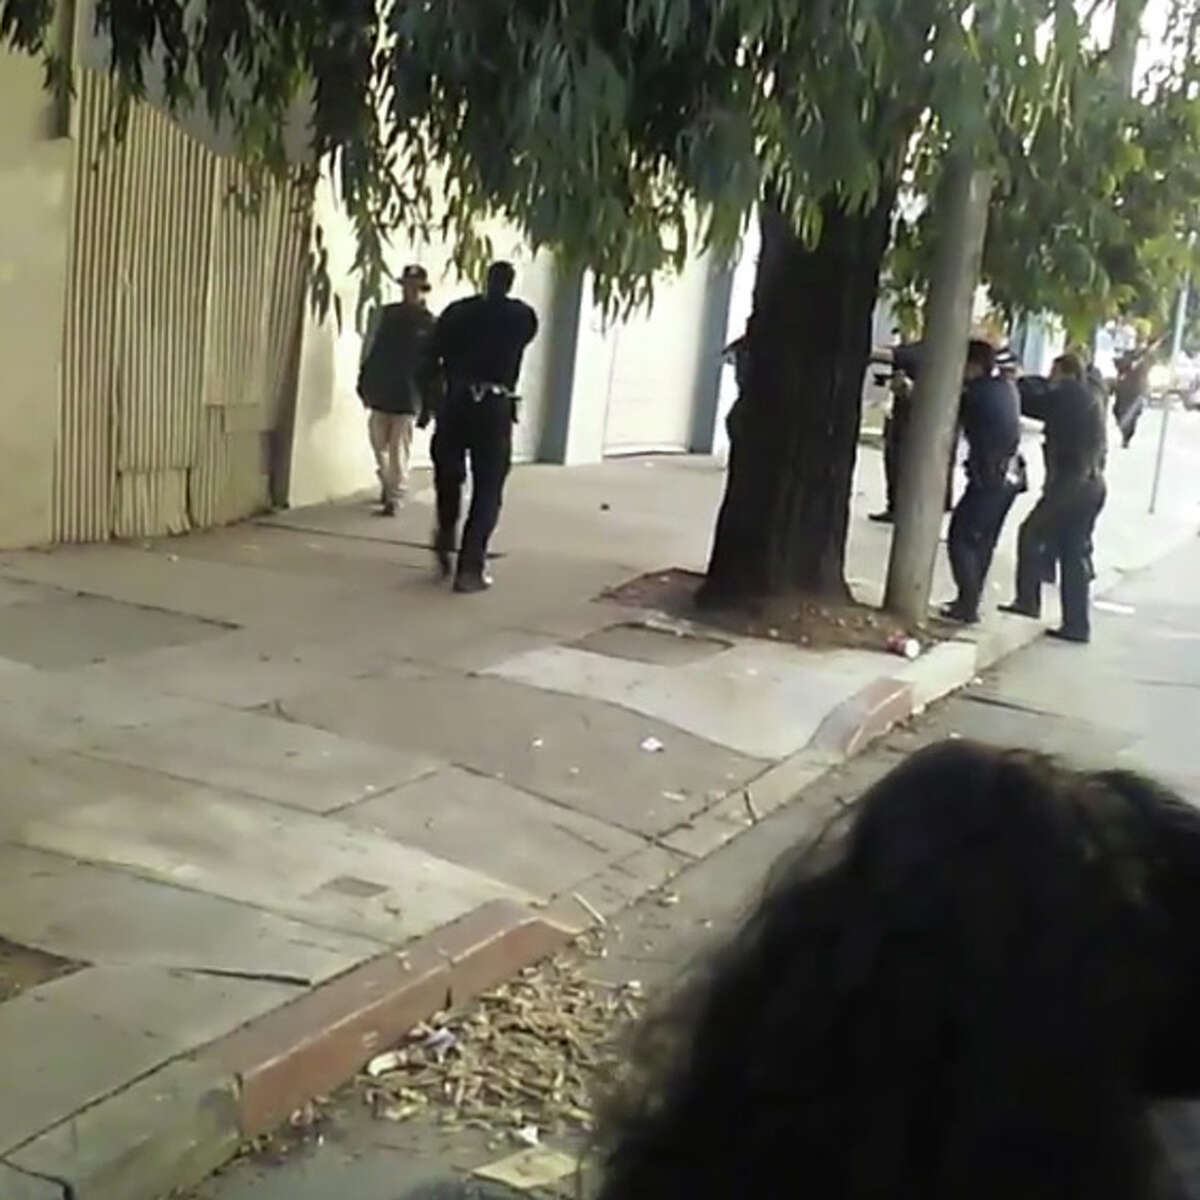 The shooting on Keith Street in San Francisco occurred after officers tried and failed to subdue the man with nonlethal beanbags, was recorded by someone on a Muni bus who posted the video to Instagram.